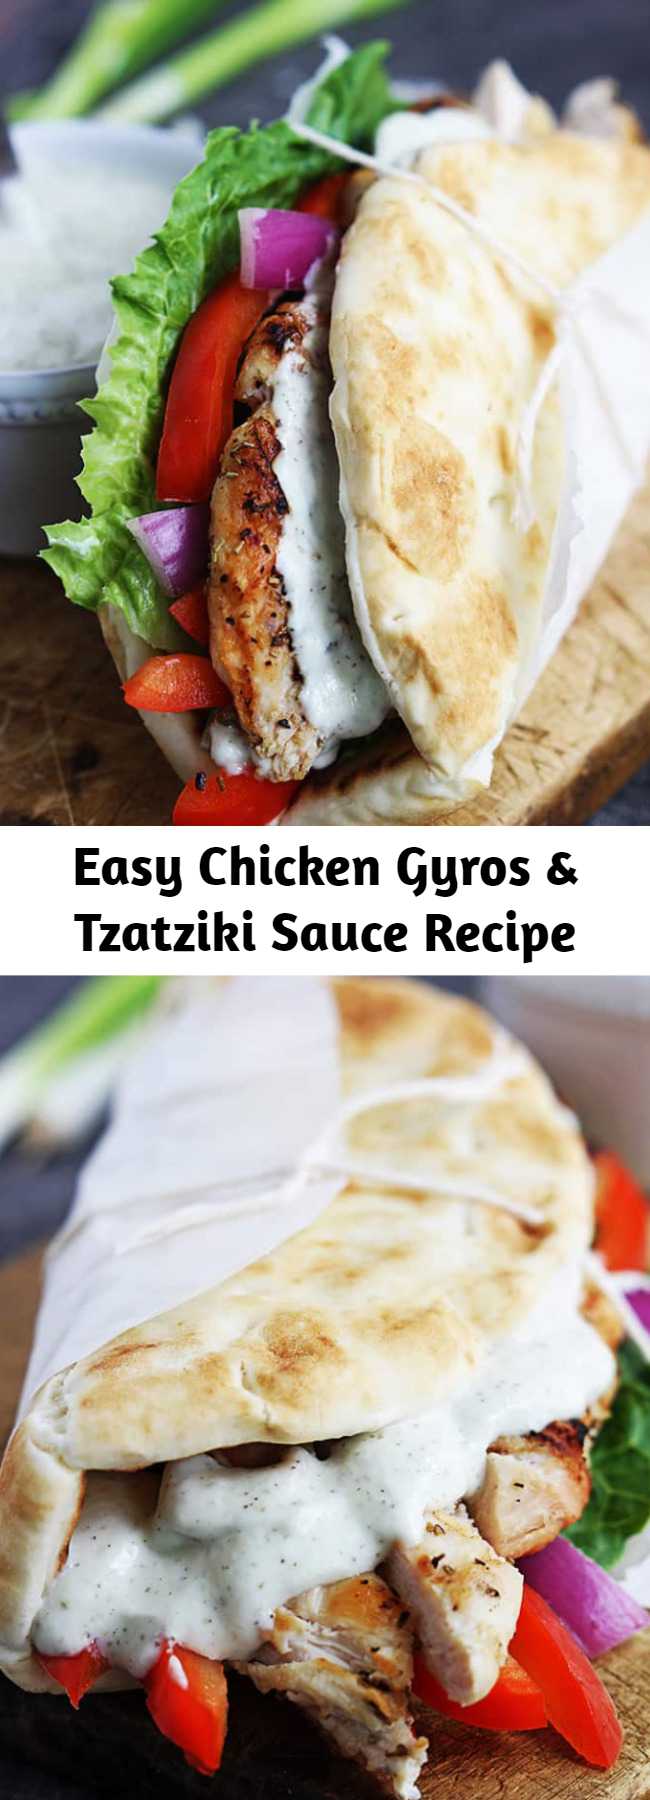 Easy Chicken Gyros & Tzatziki Sauce Recipe - Quick Greek-style chicken gyros you can whip up on busy nights in just 20 minutes, these are a family favorite!